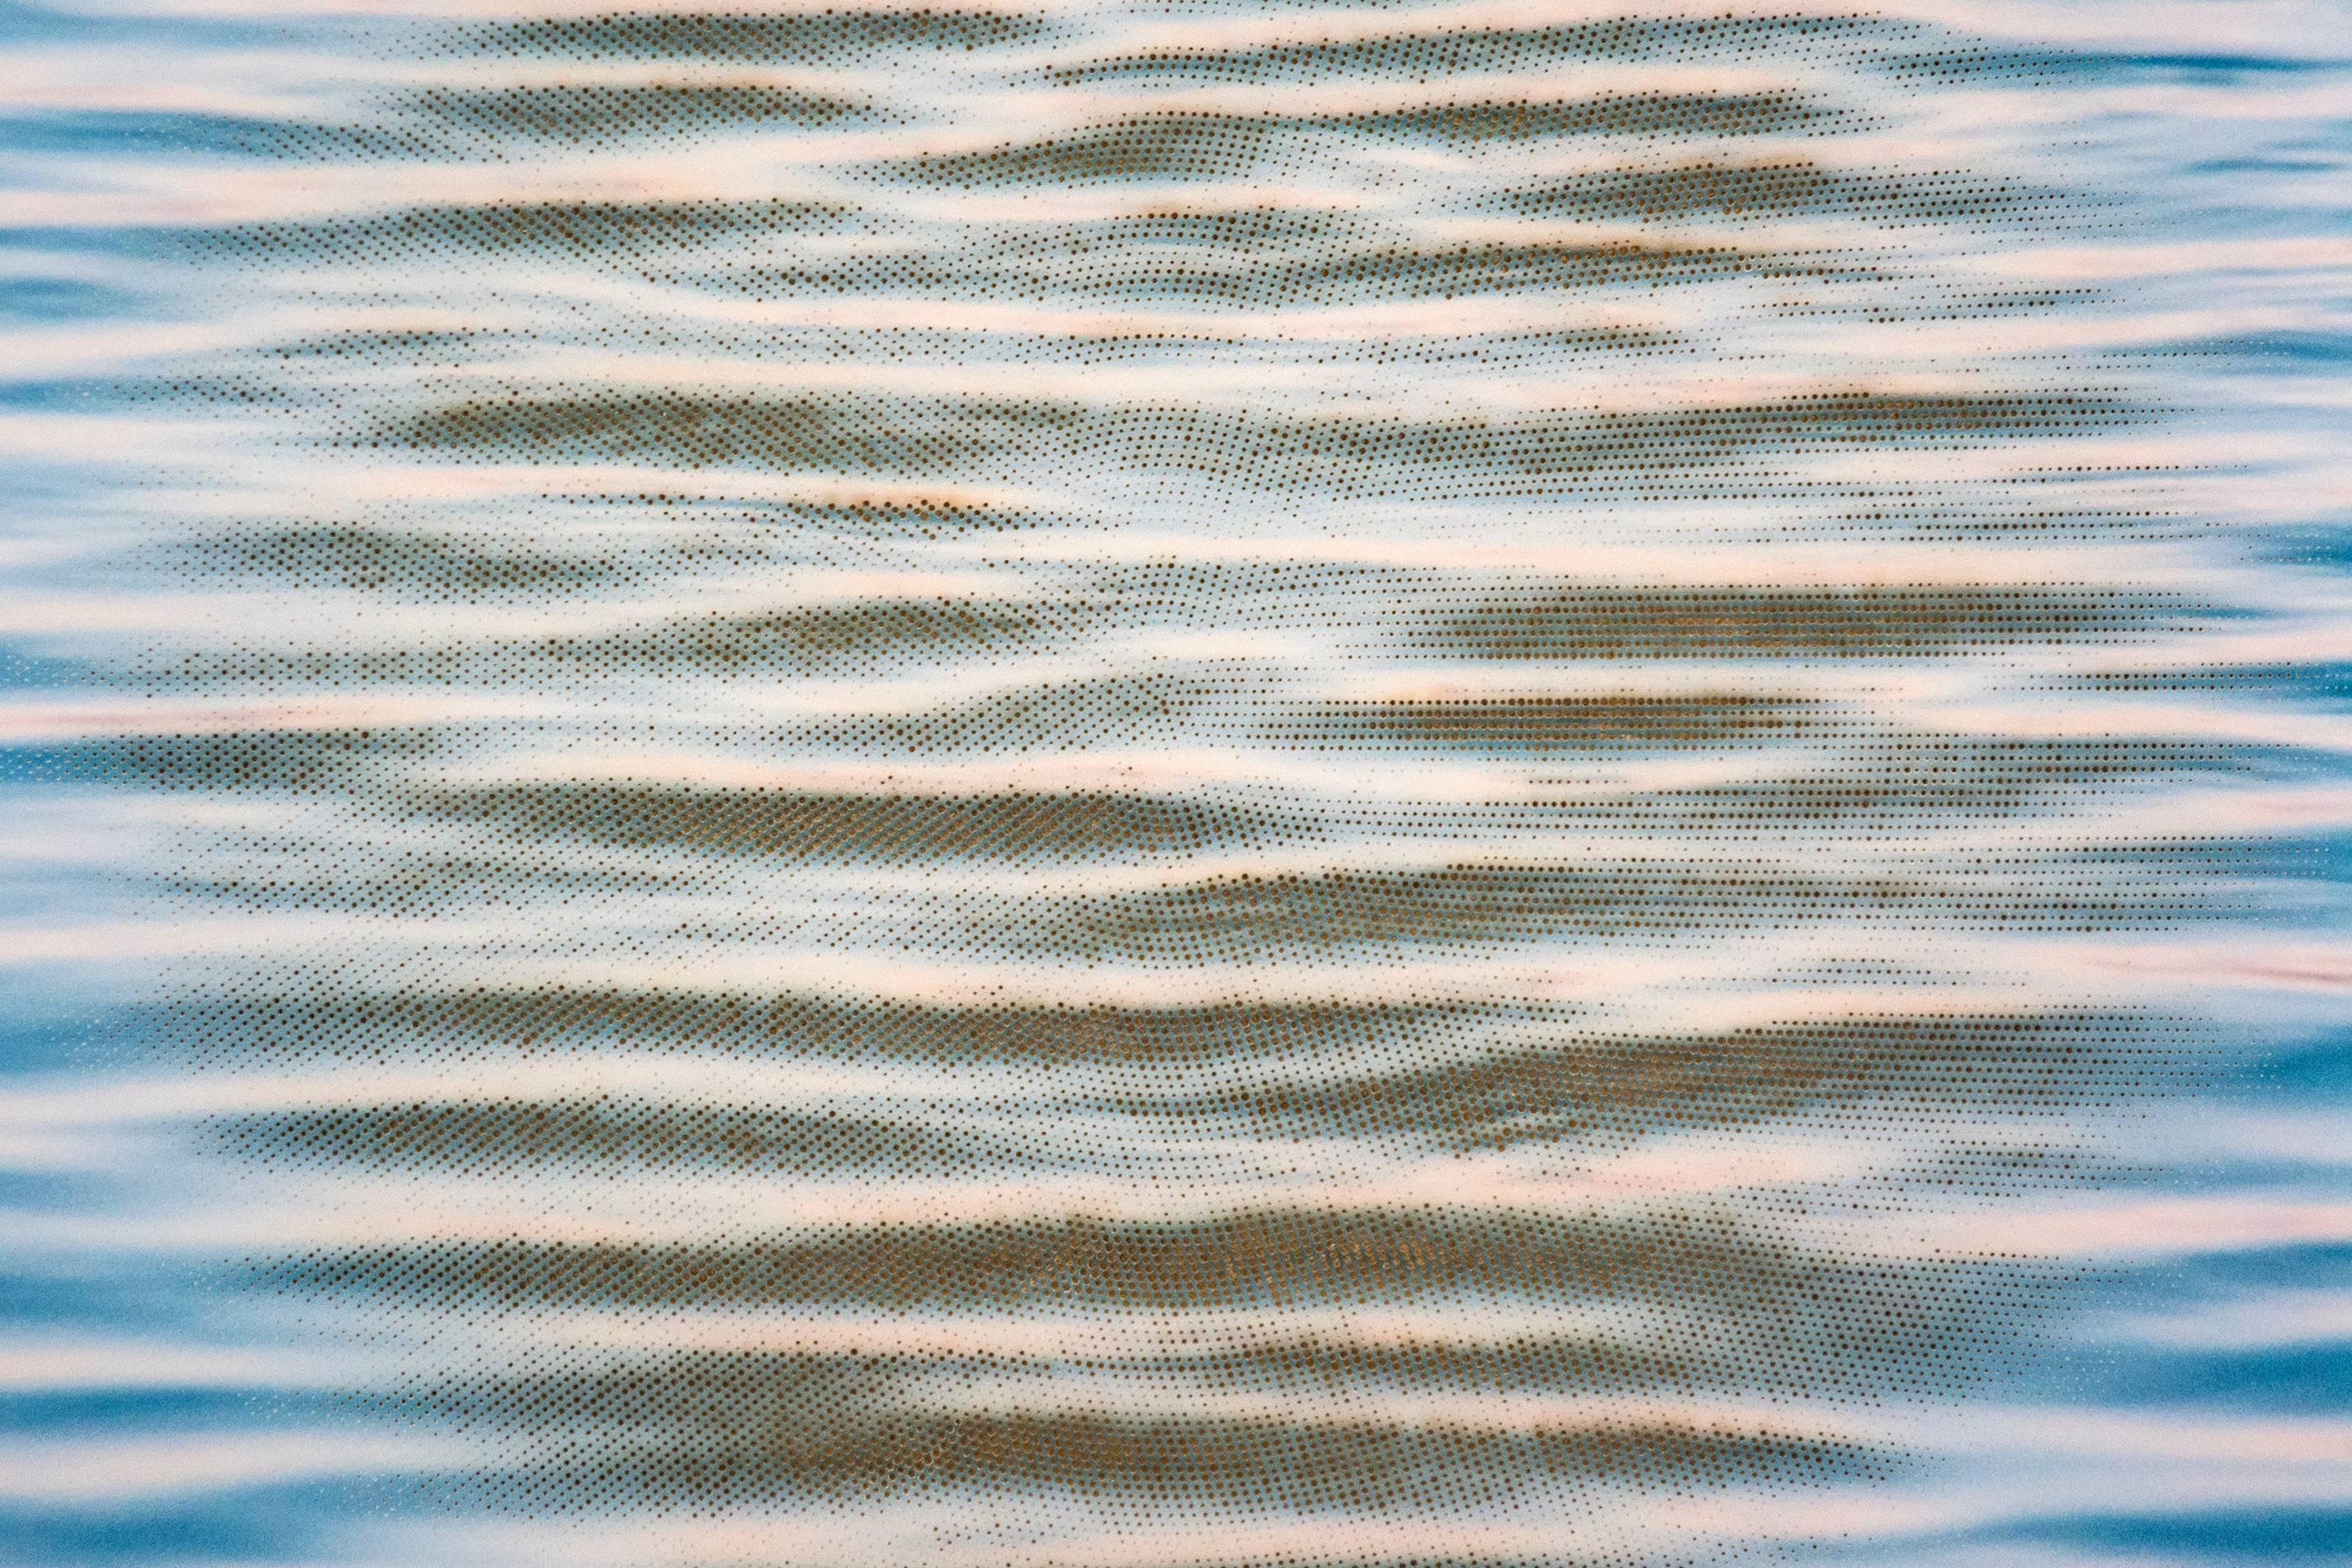 From beneath the black, light blue and off white ripples on the surface of calm water, a gold sun emerges through precise, geometric perforations in this mixed media image by Ryan Van Der Hout. Gold leaf behind a laser cut pigment print photograph